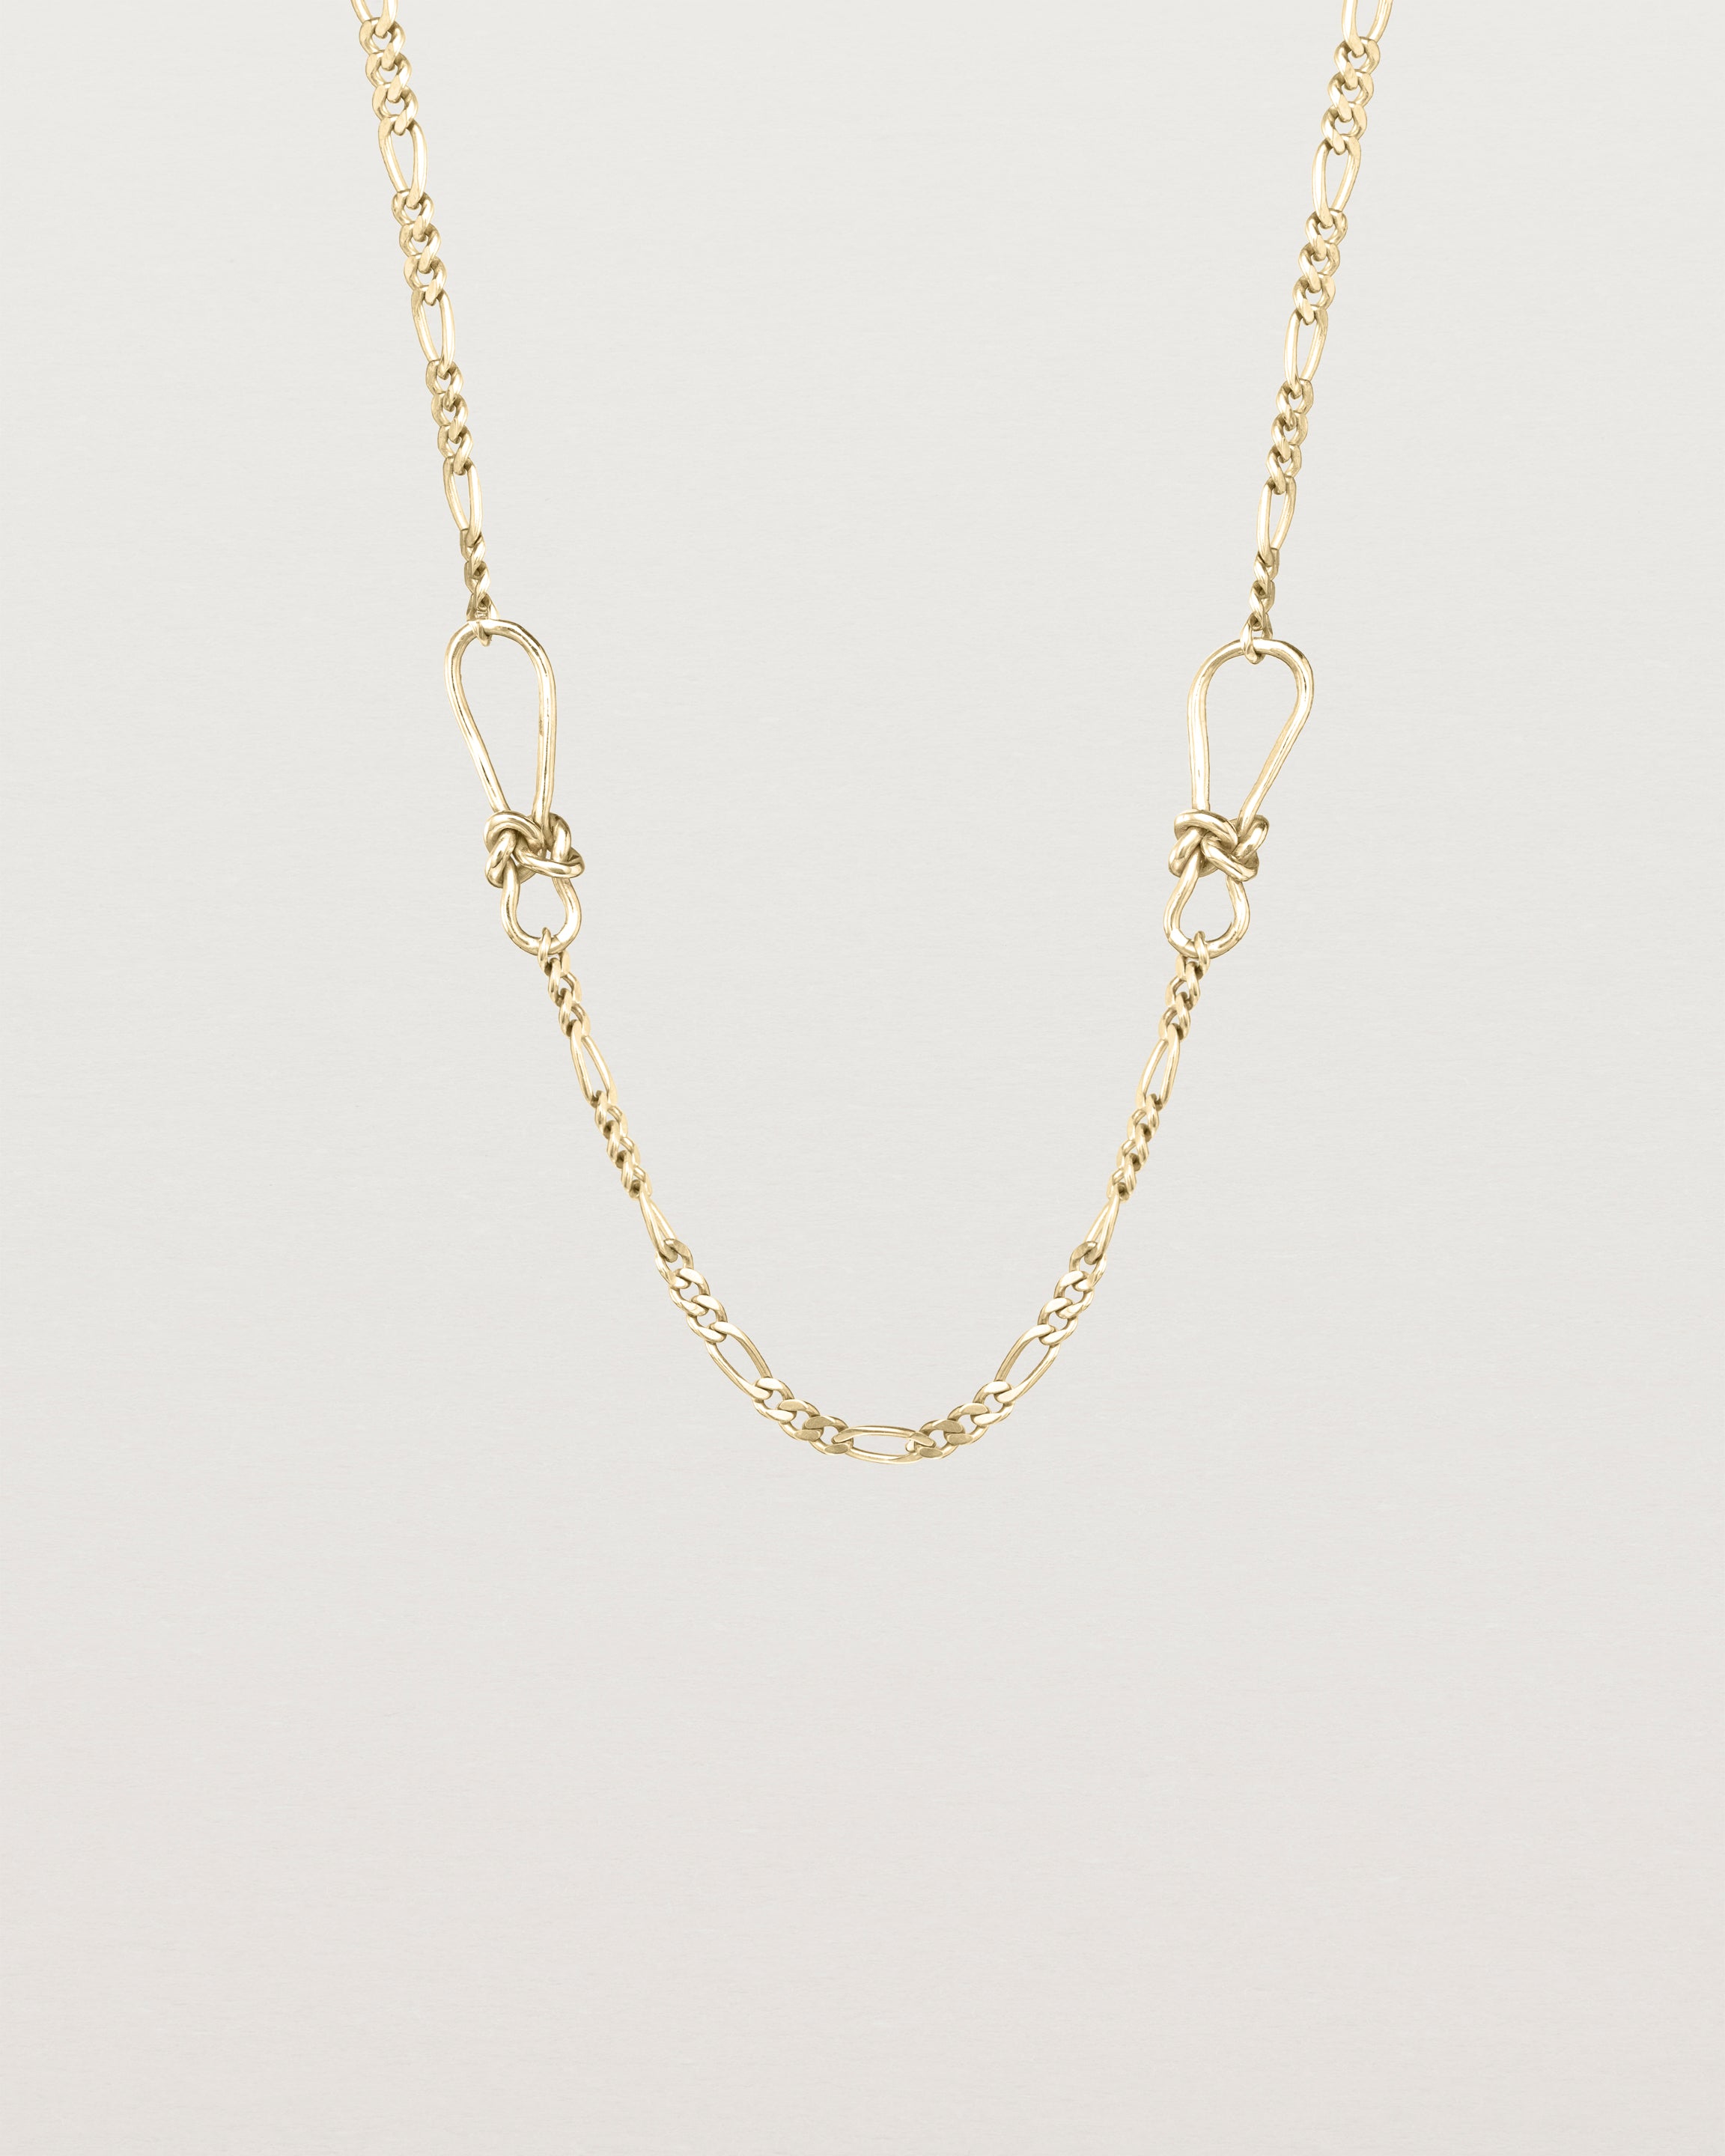 The Dà anam Necklace in yellow gold.